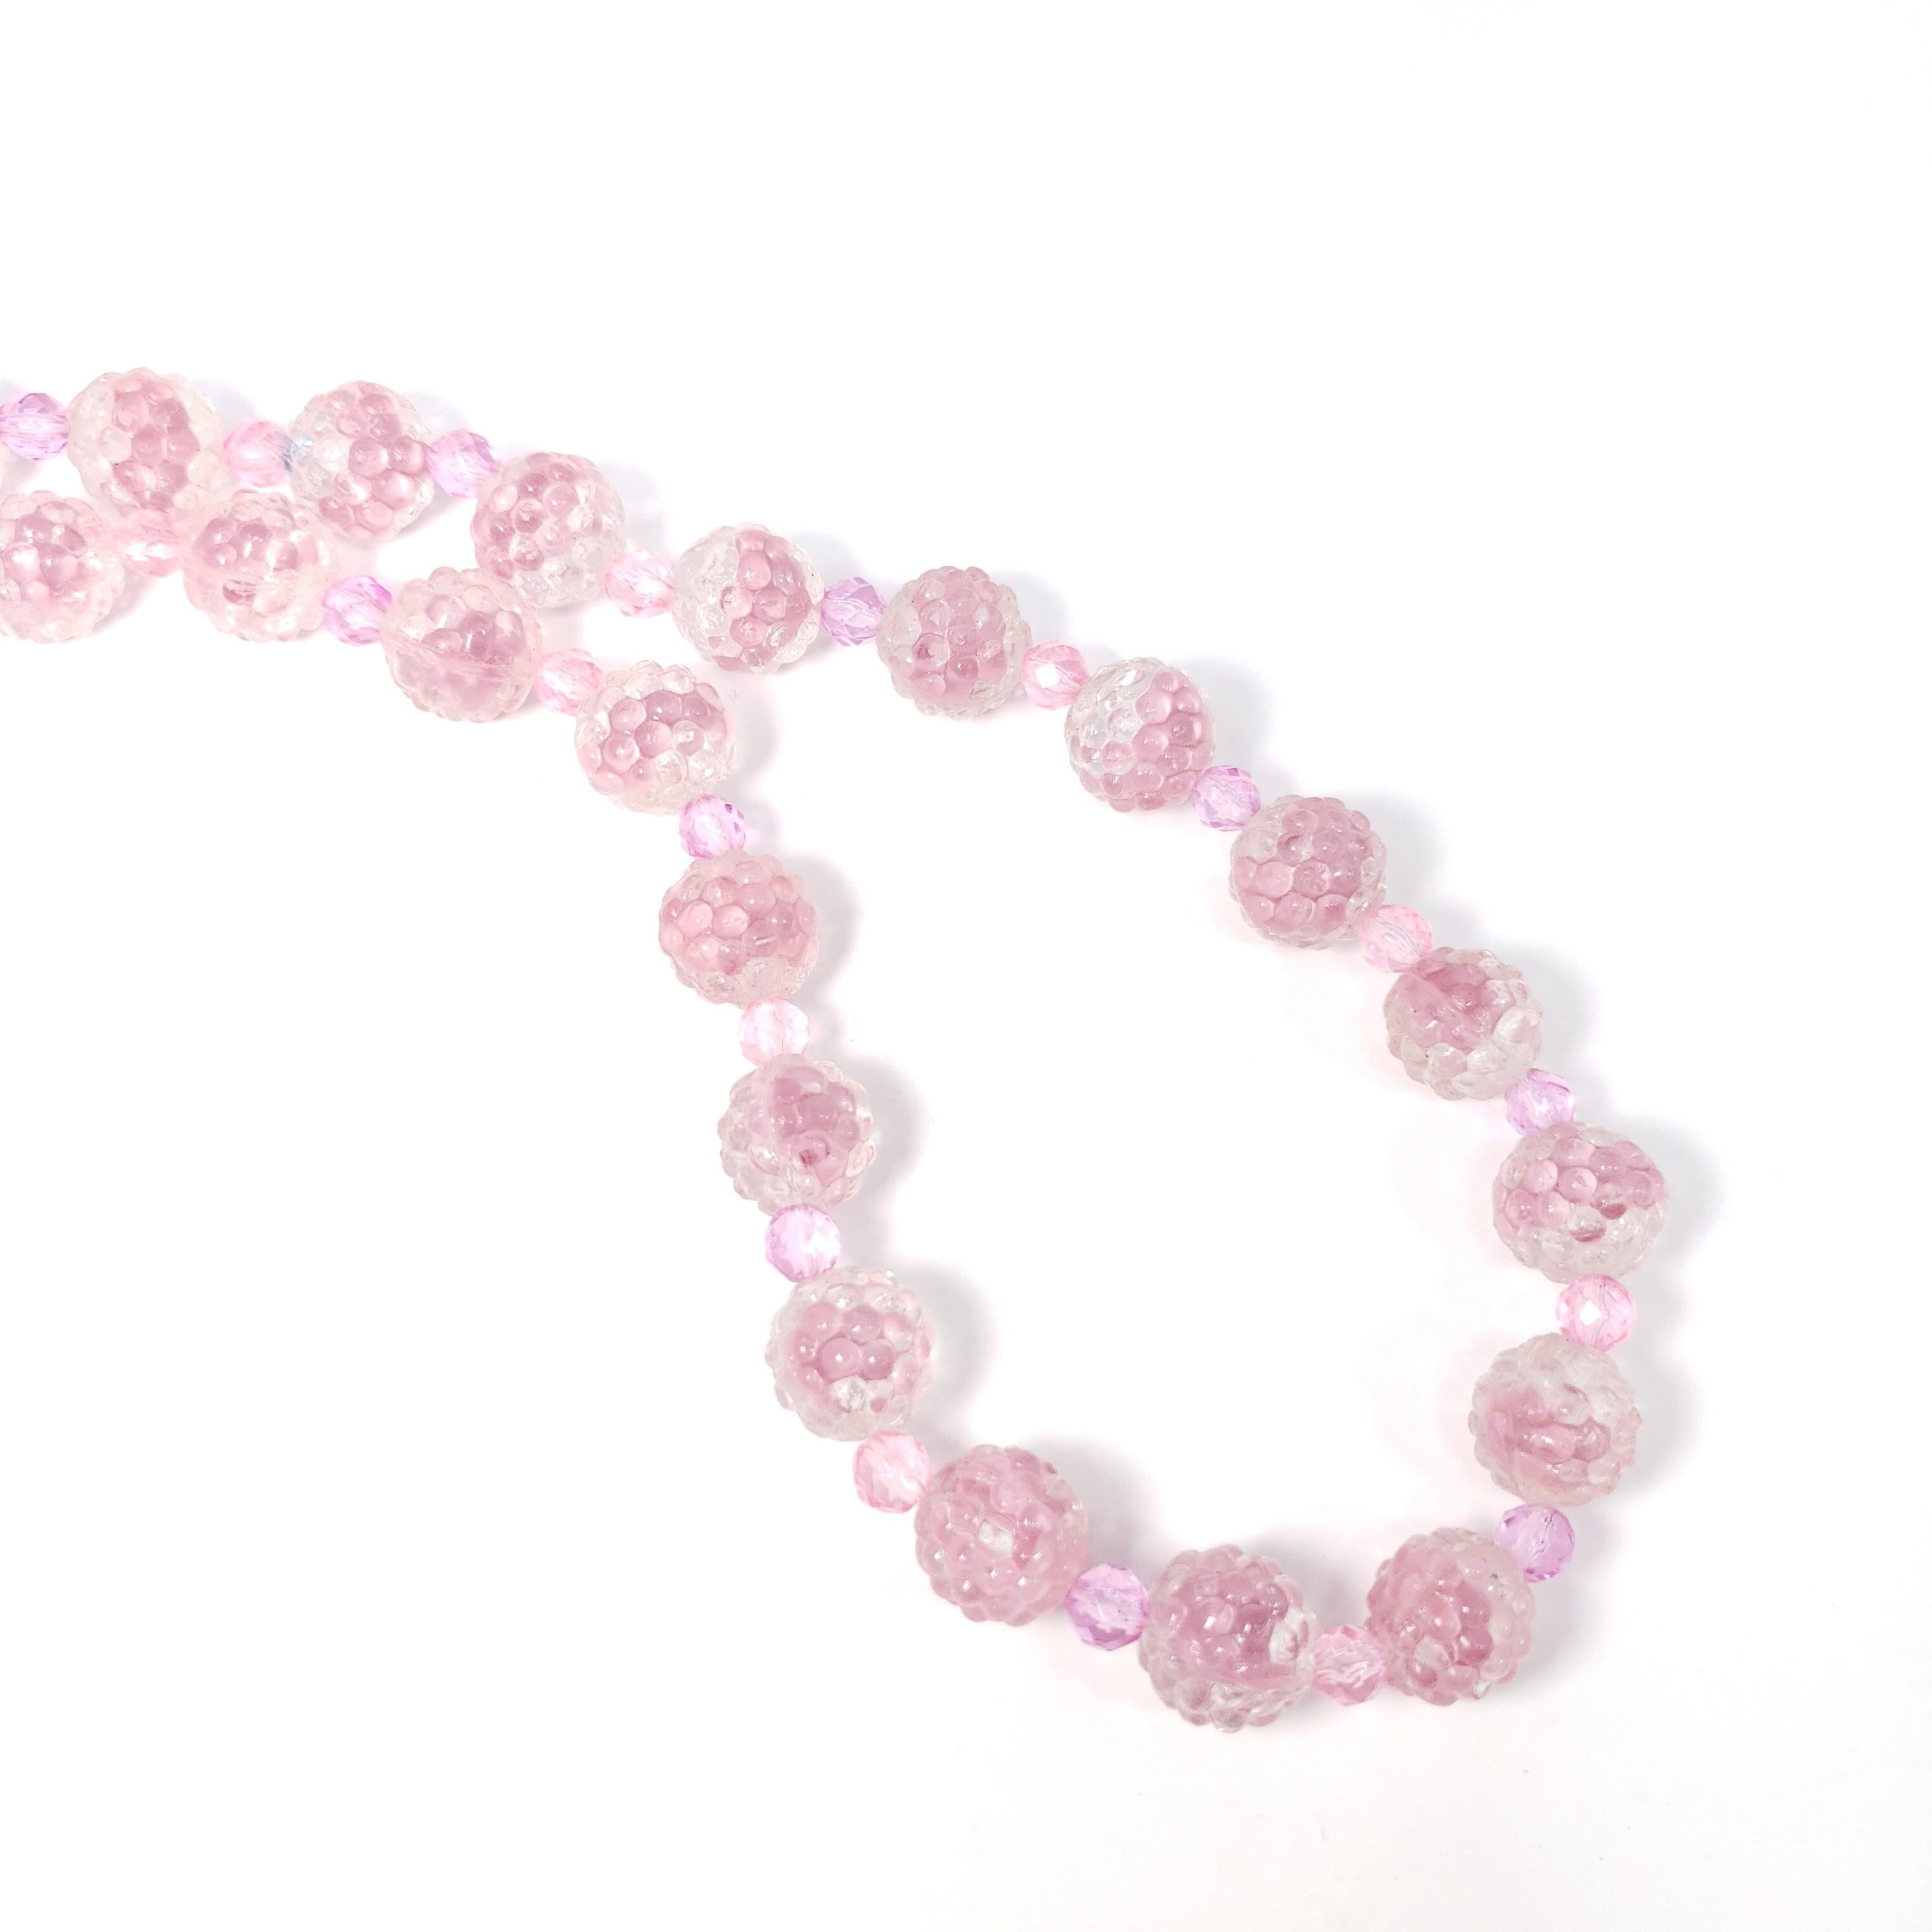 pink glass bead necklace